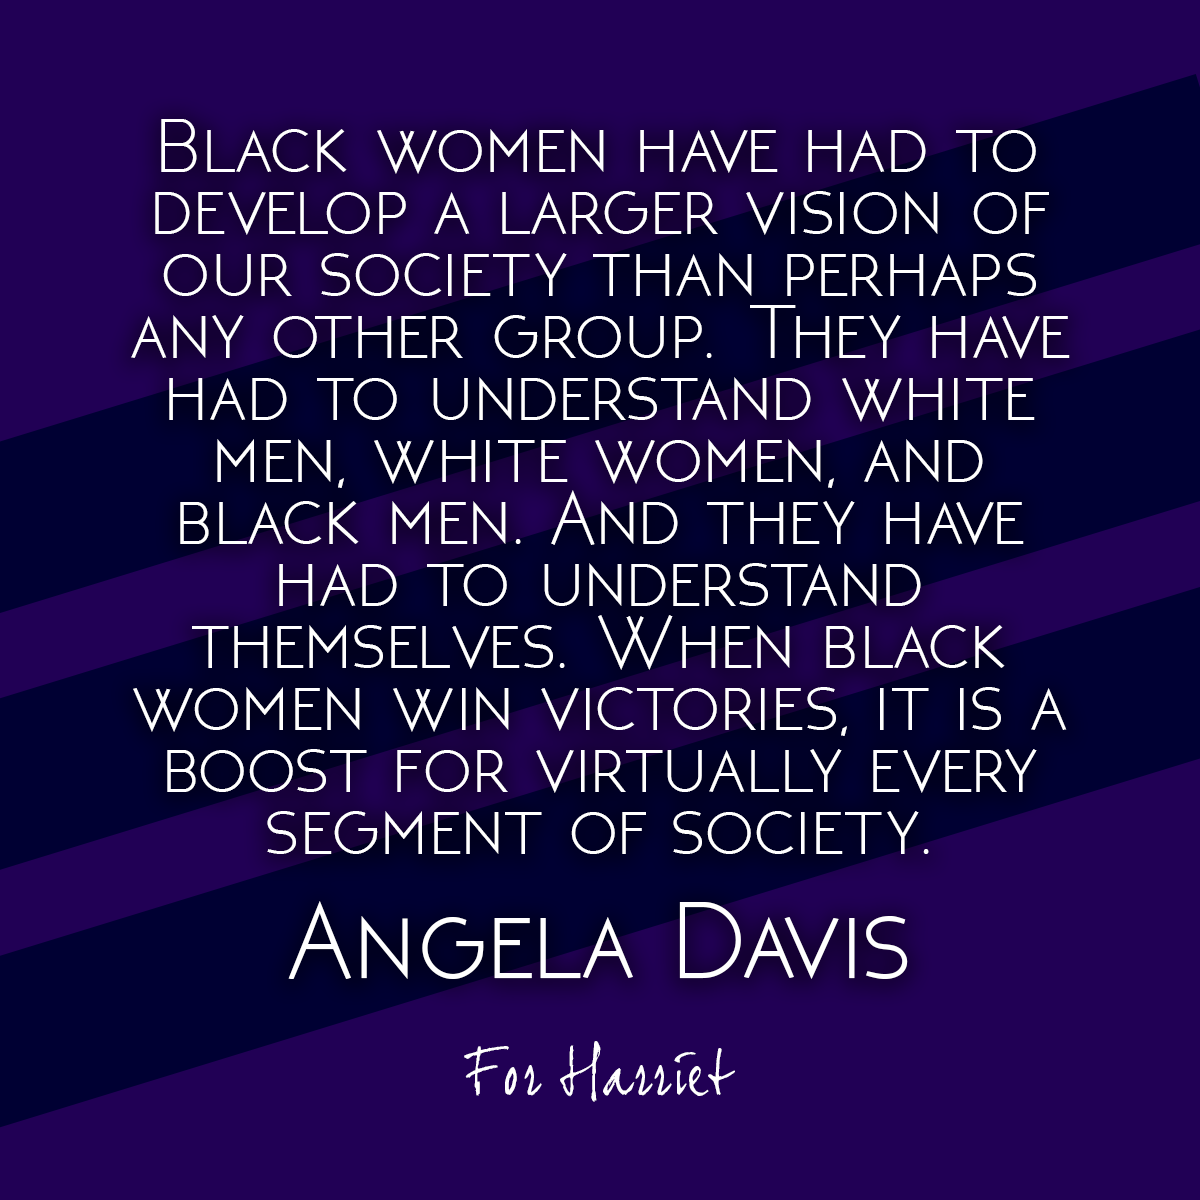 20 Quotes from Angela Davis That Inspire Us to Keep Up the Fight